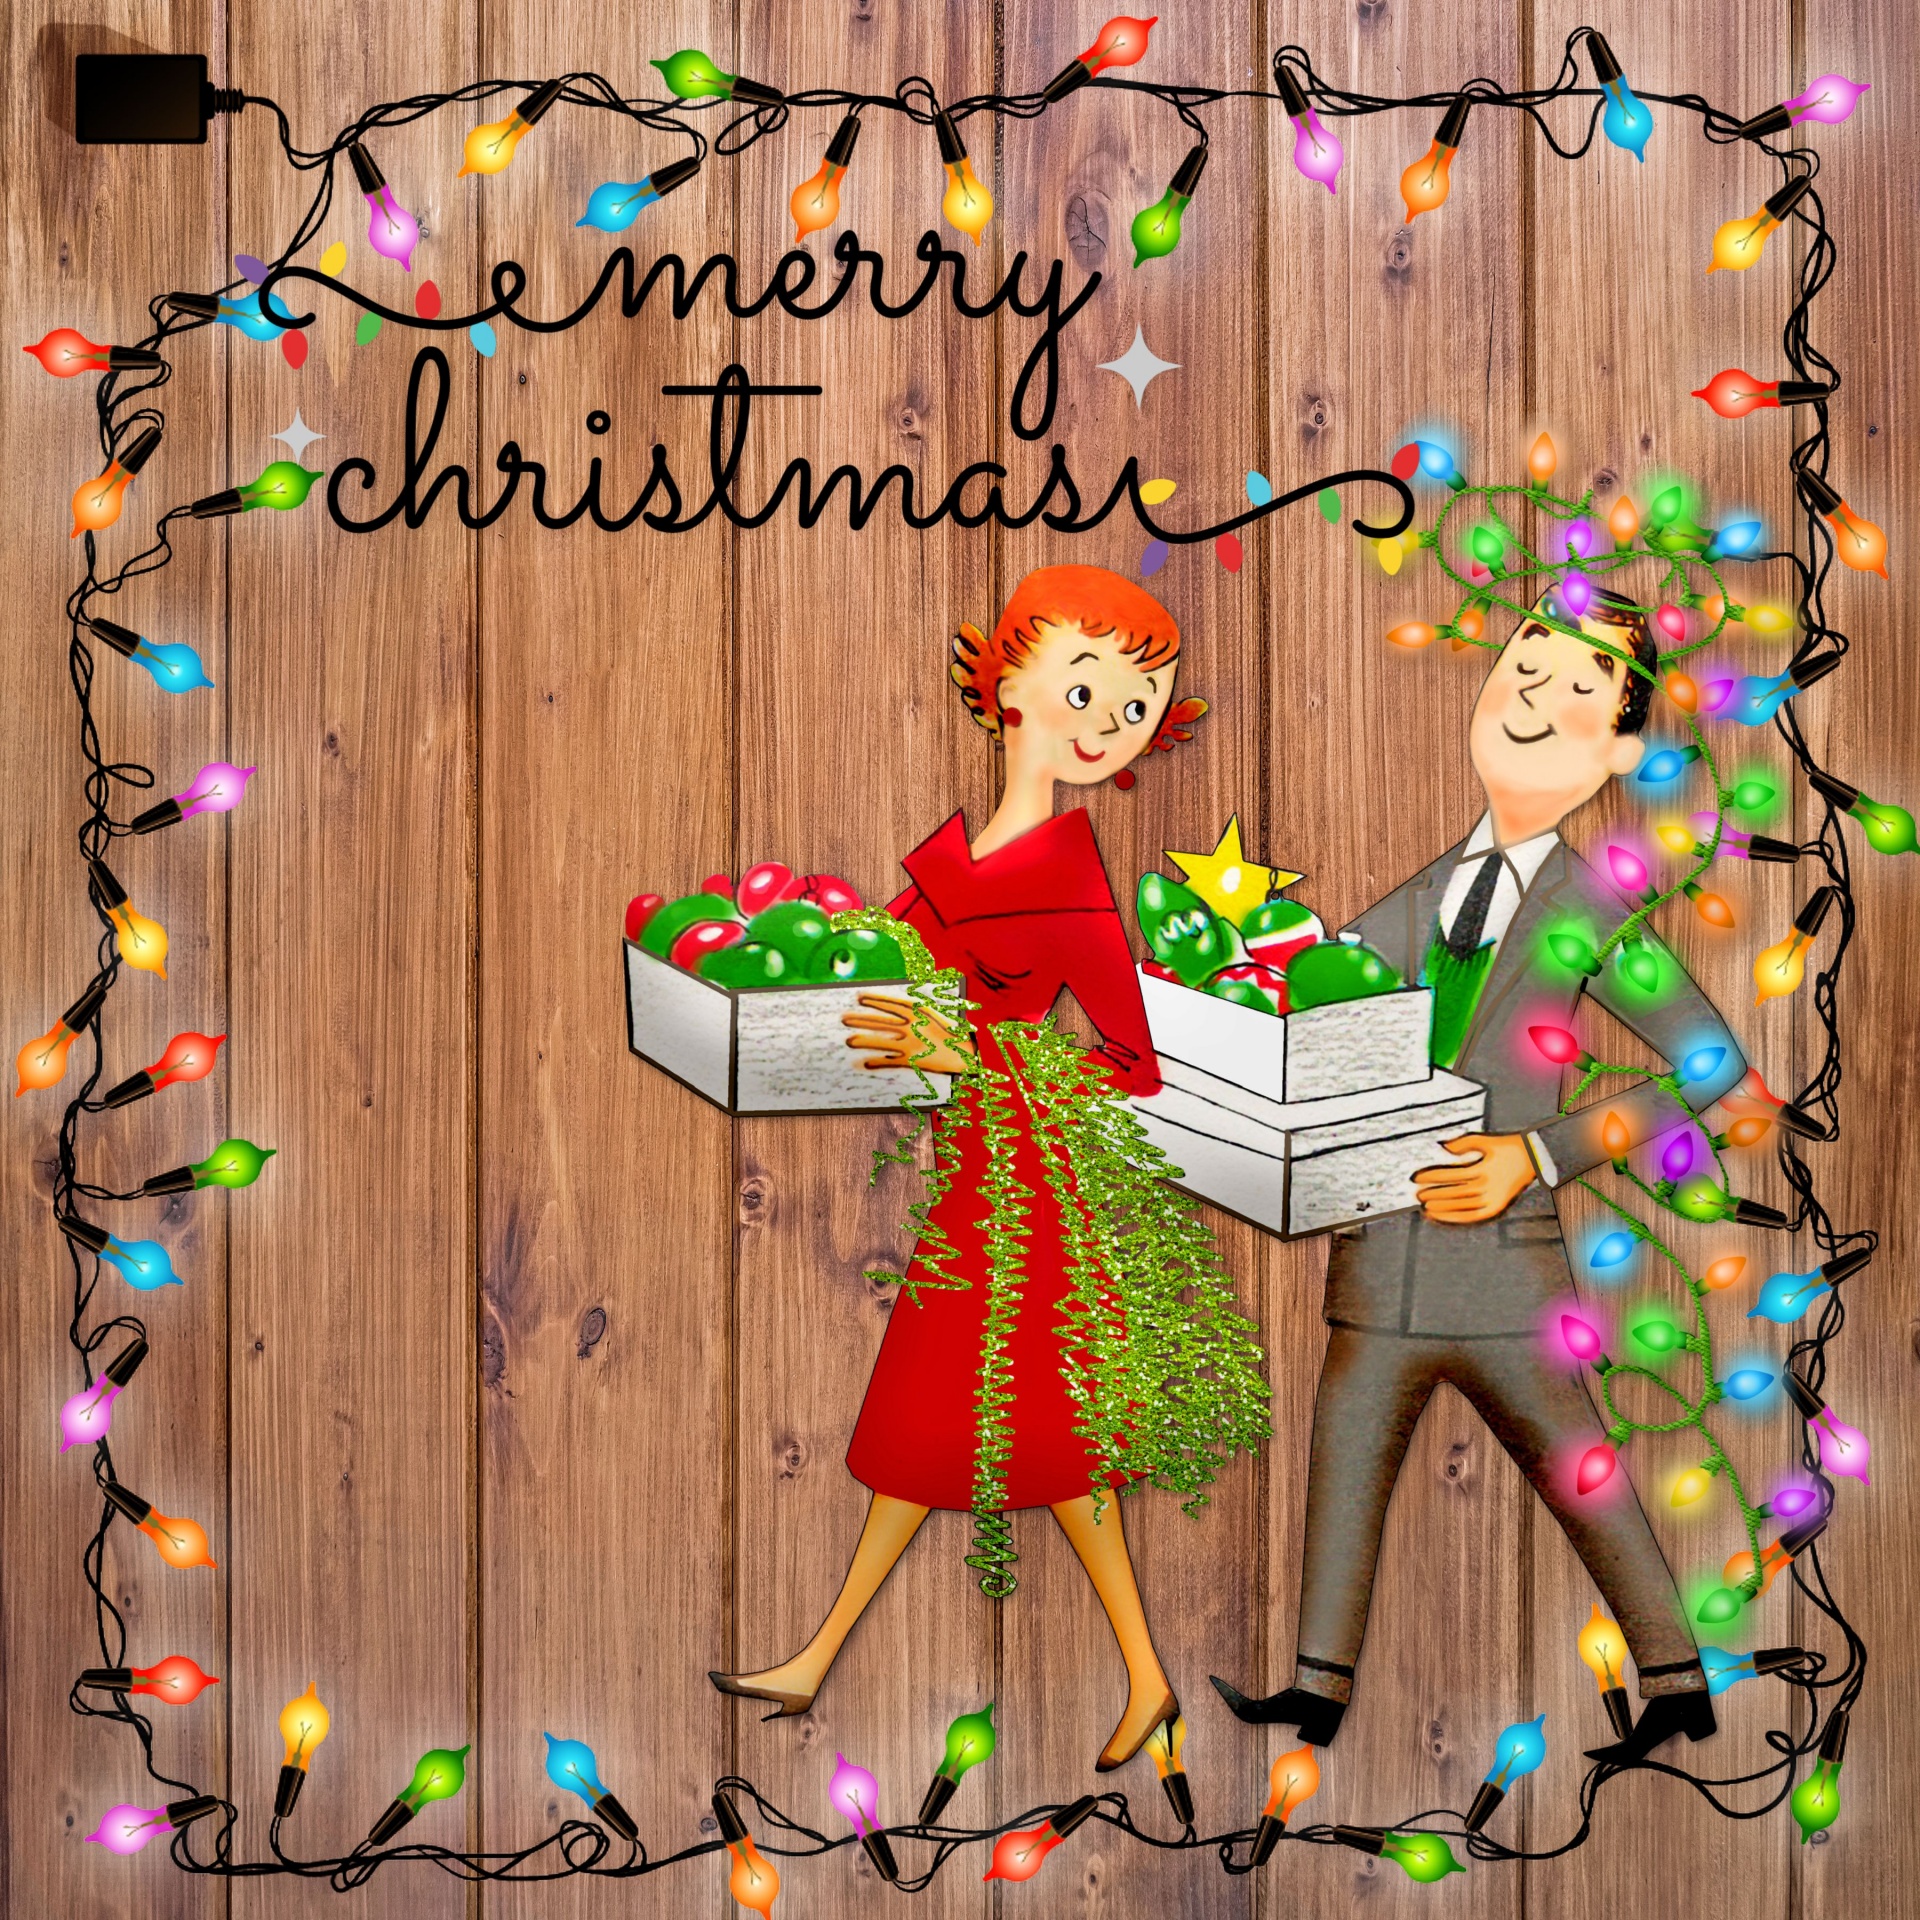 1950 Mid-century illustration of a couple walking with boxes of ornaments with a Christmas Greeting. On wood background famed in Christmas Lights